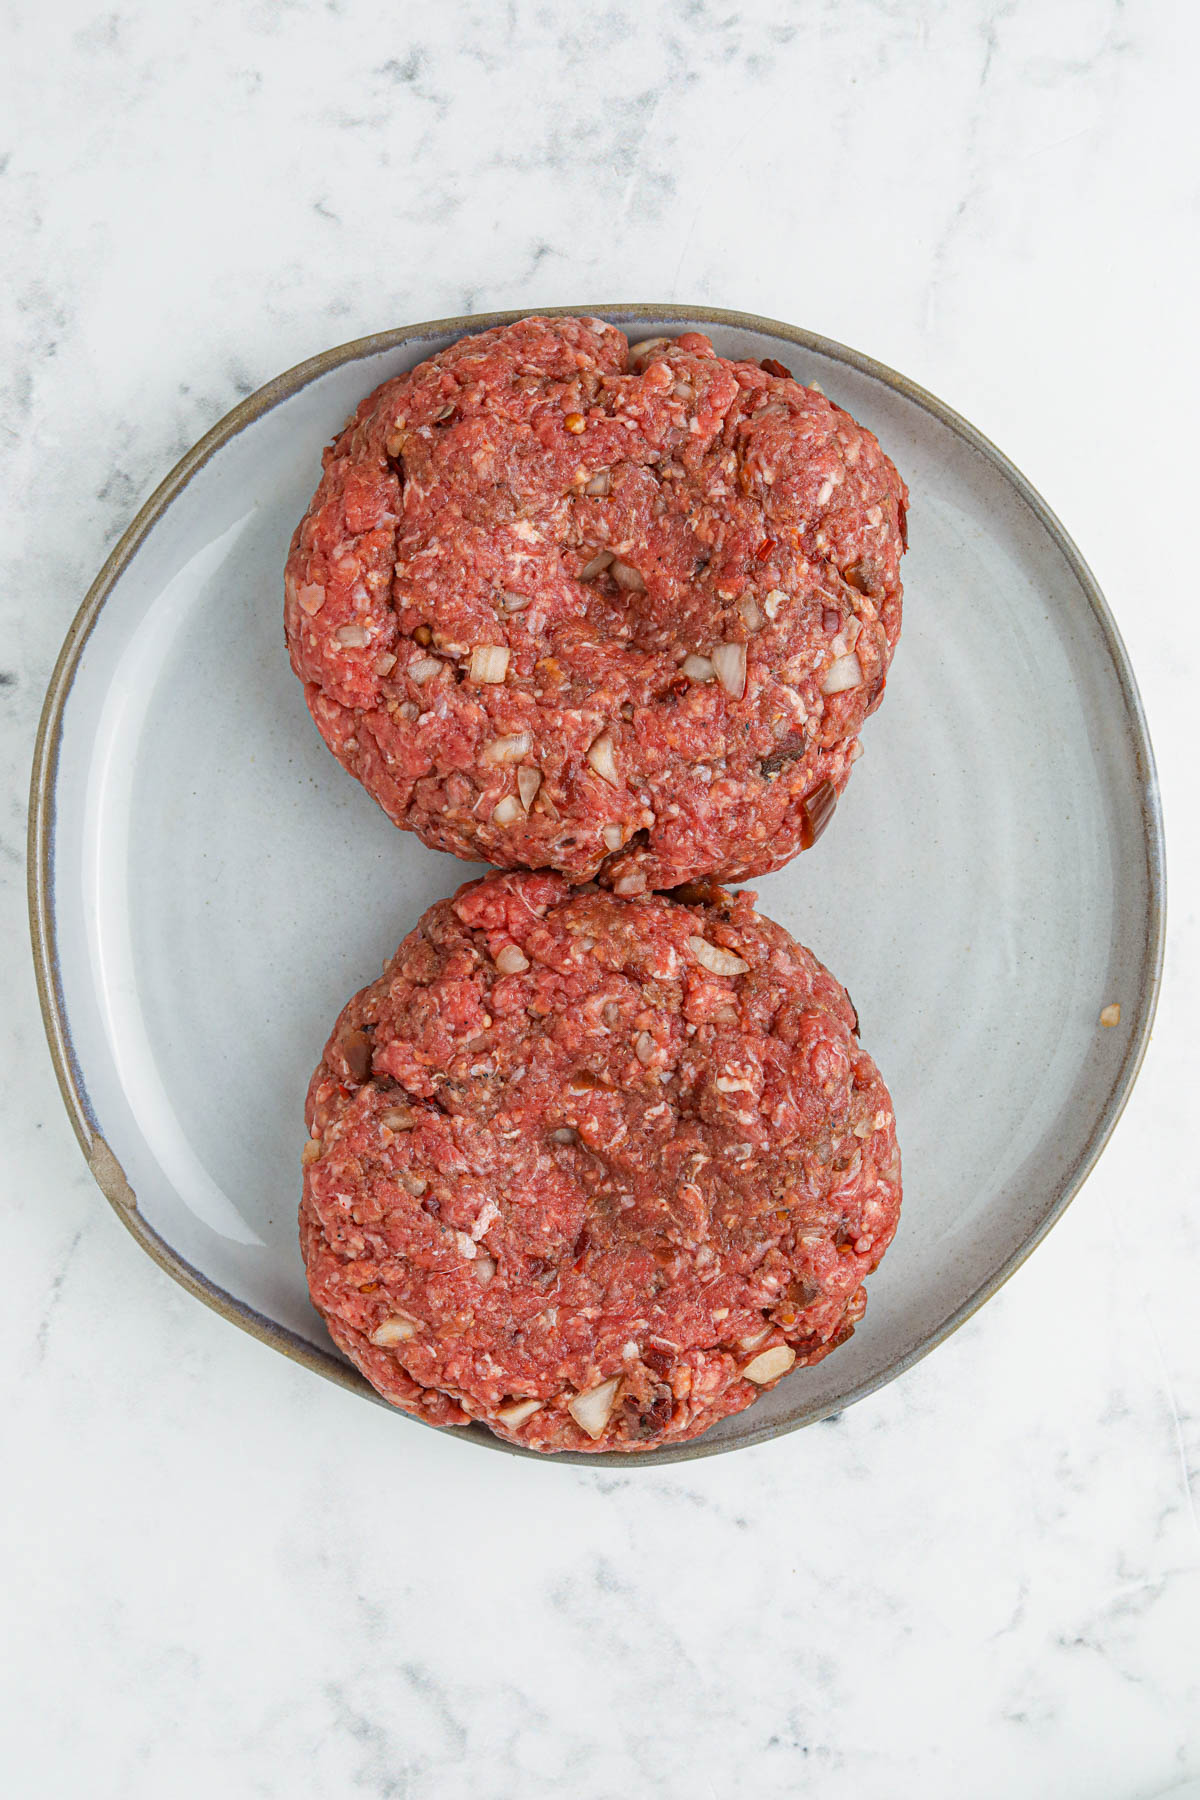 Overhead image of two formed hamburger patties, before they are cooked.